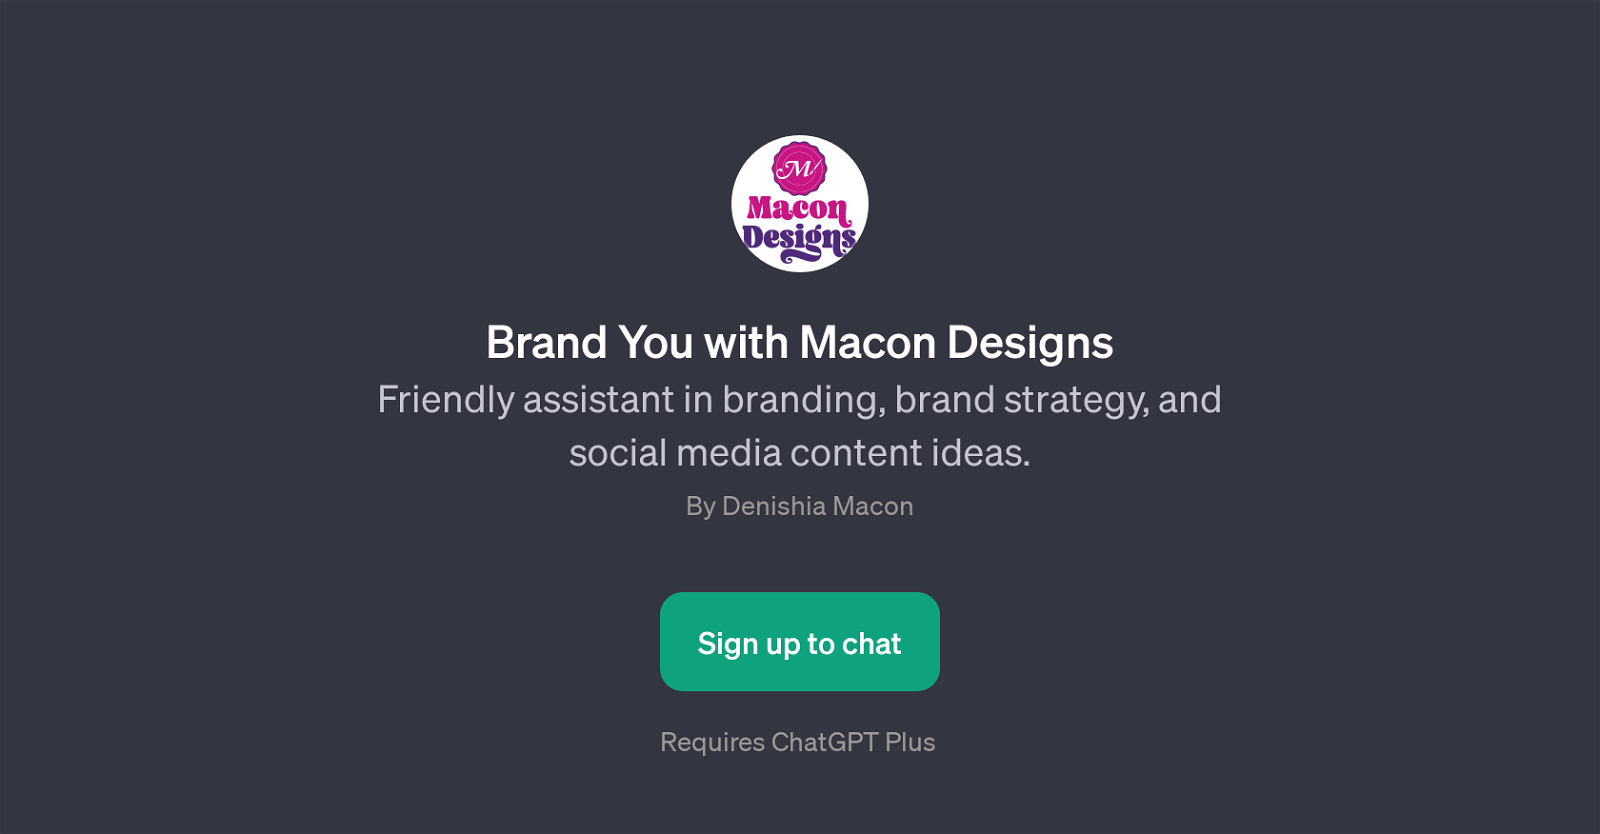 Brand You with Macon Designs website